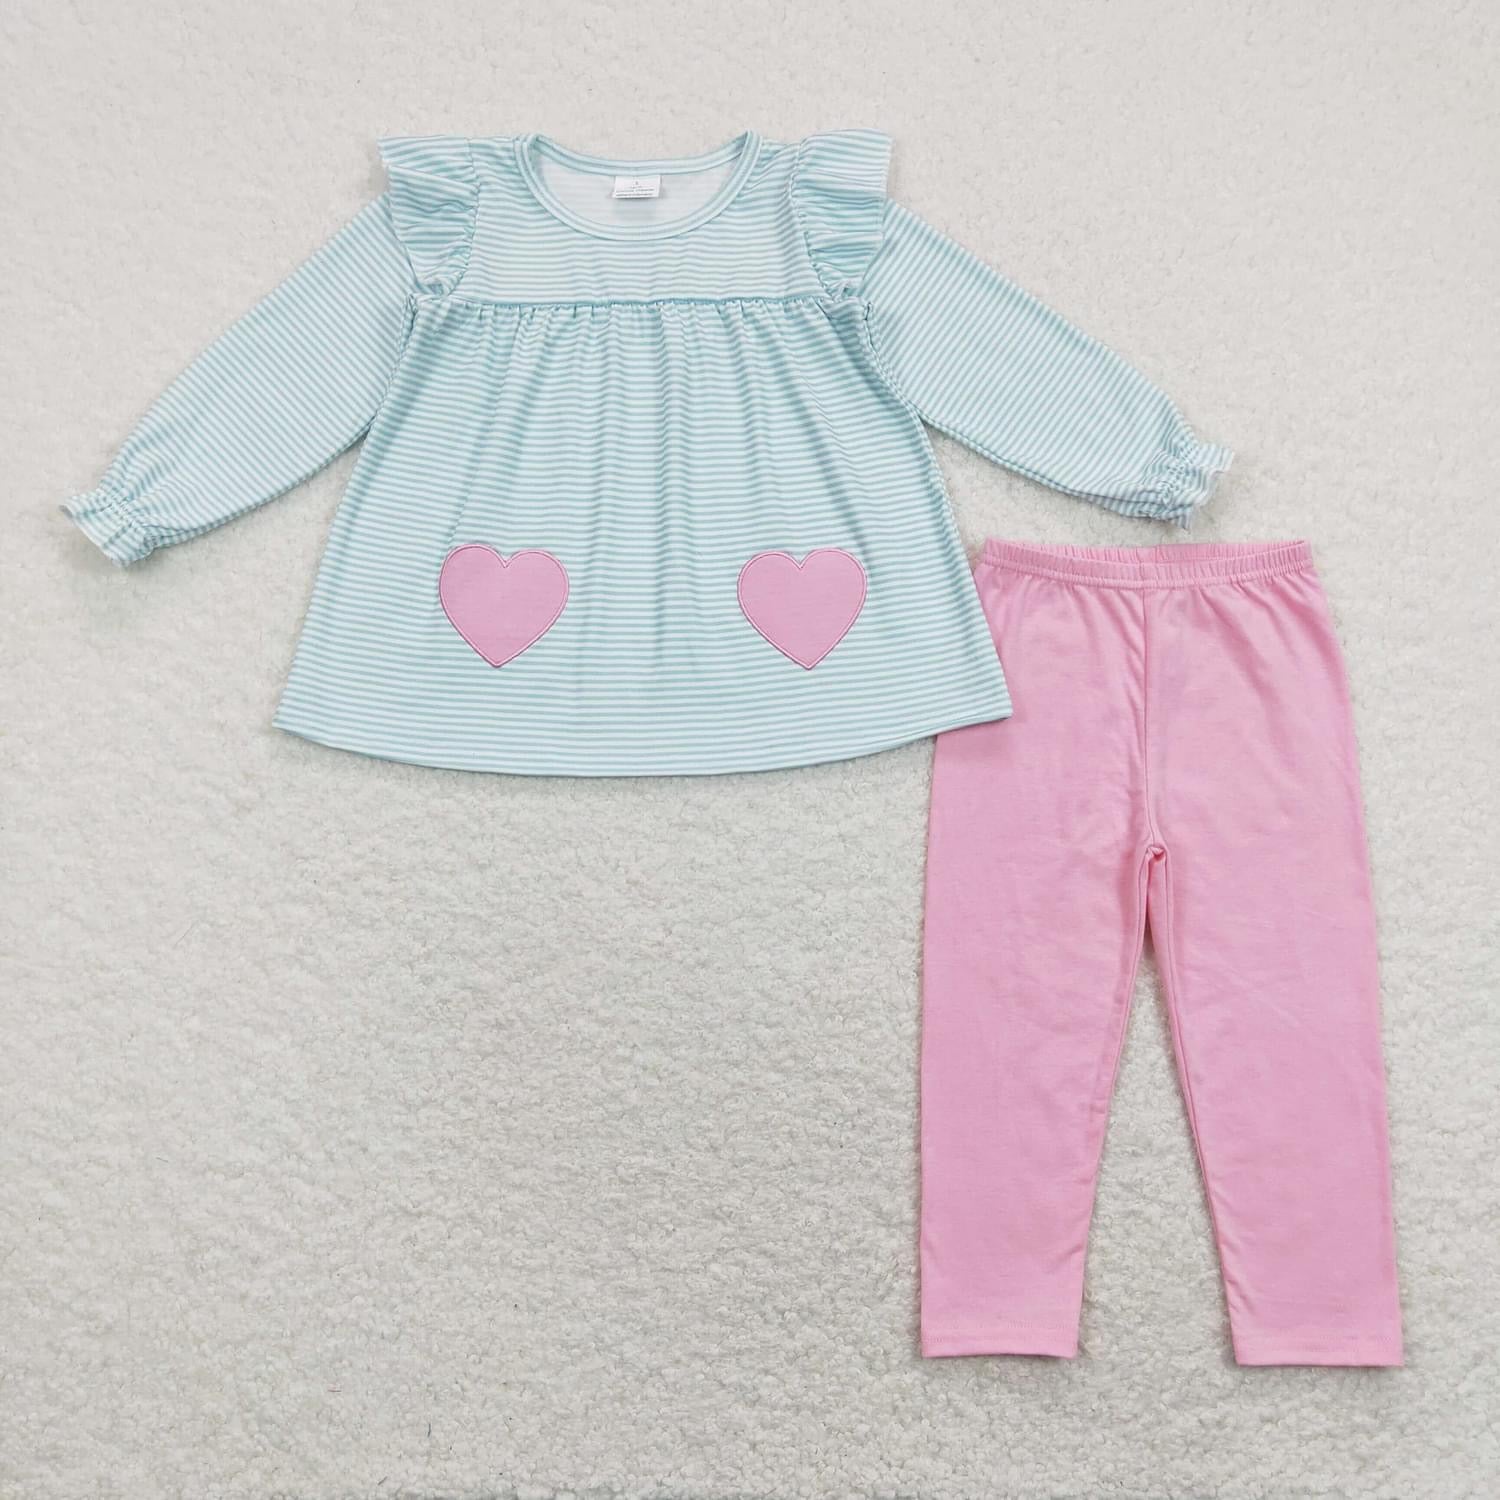 Pink and blue  Hearts Pants outfit